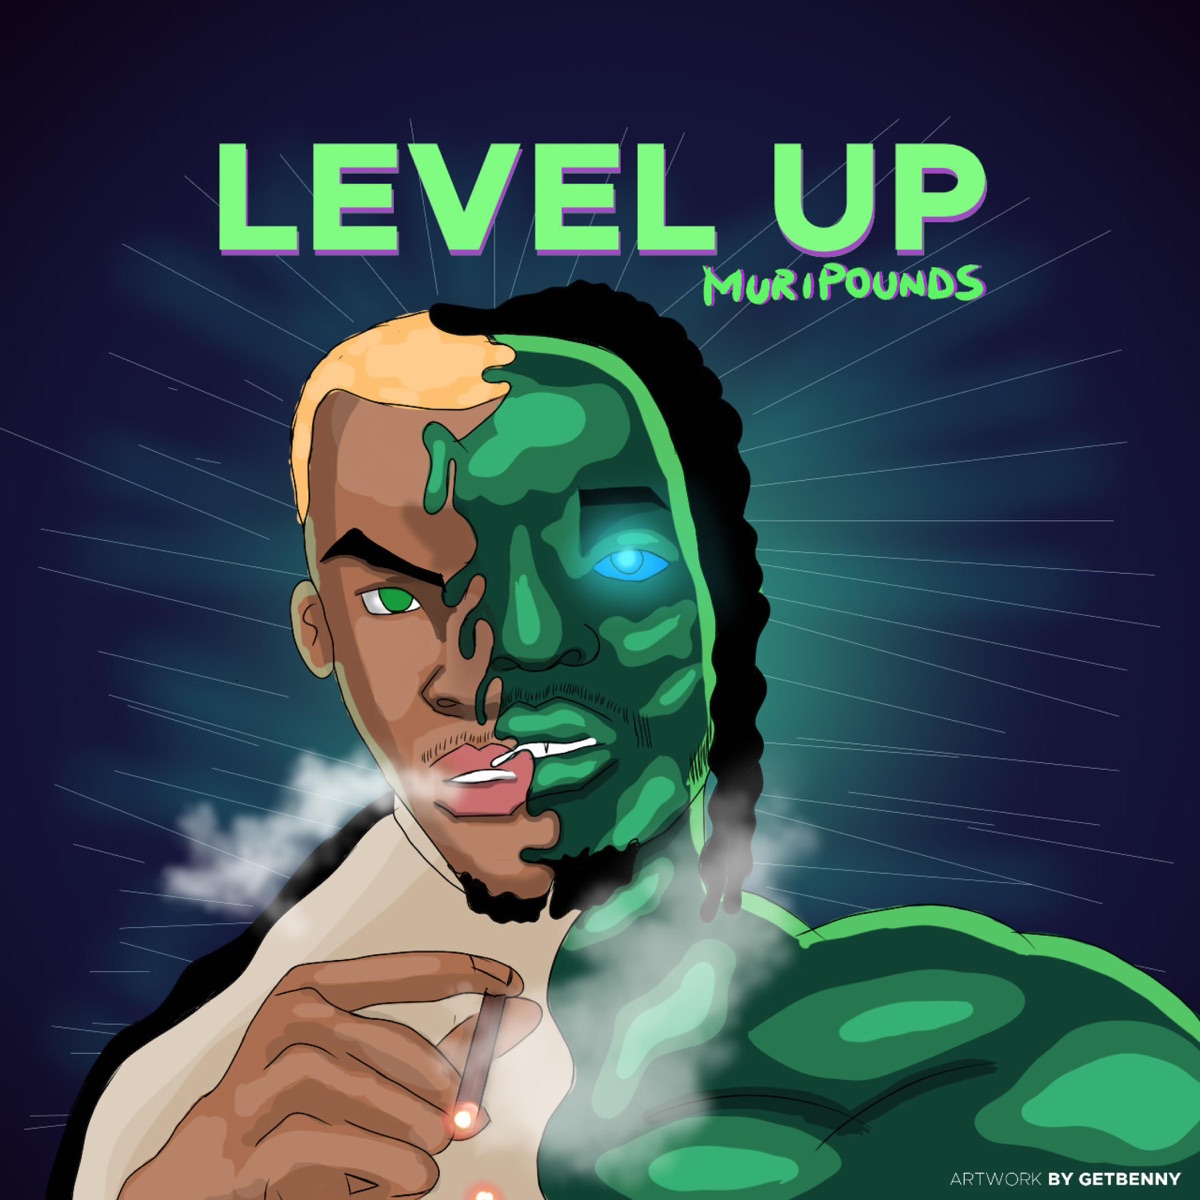 Muripounds - Level Up